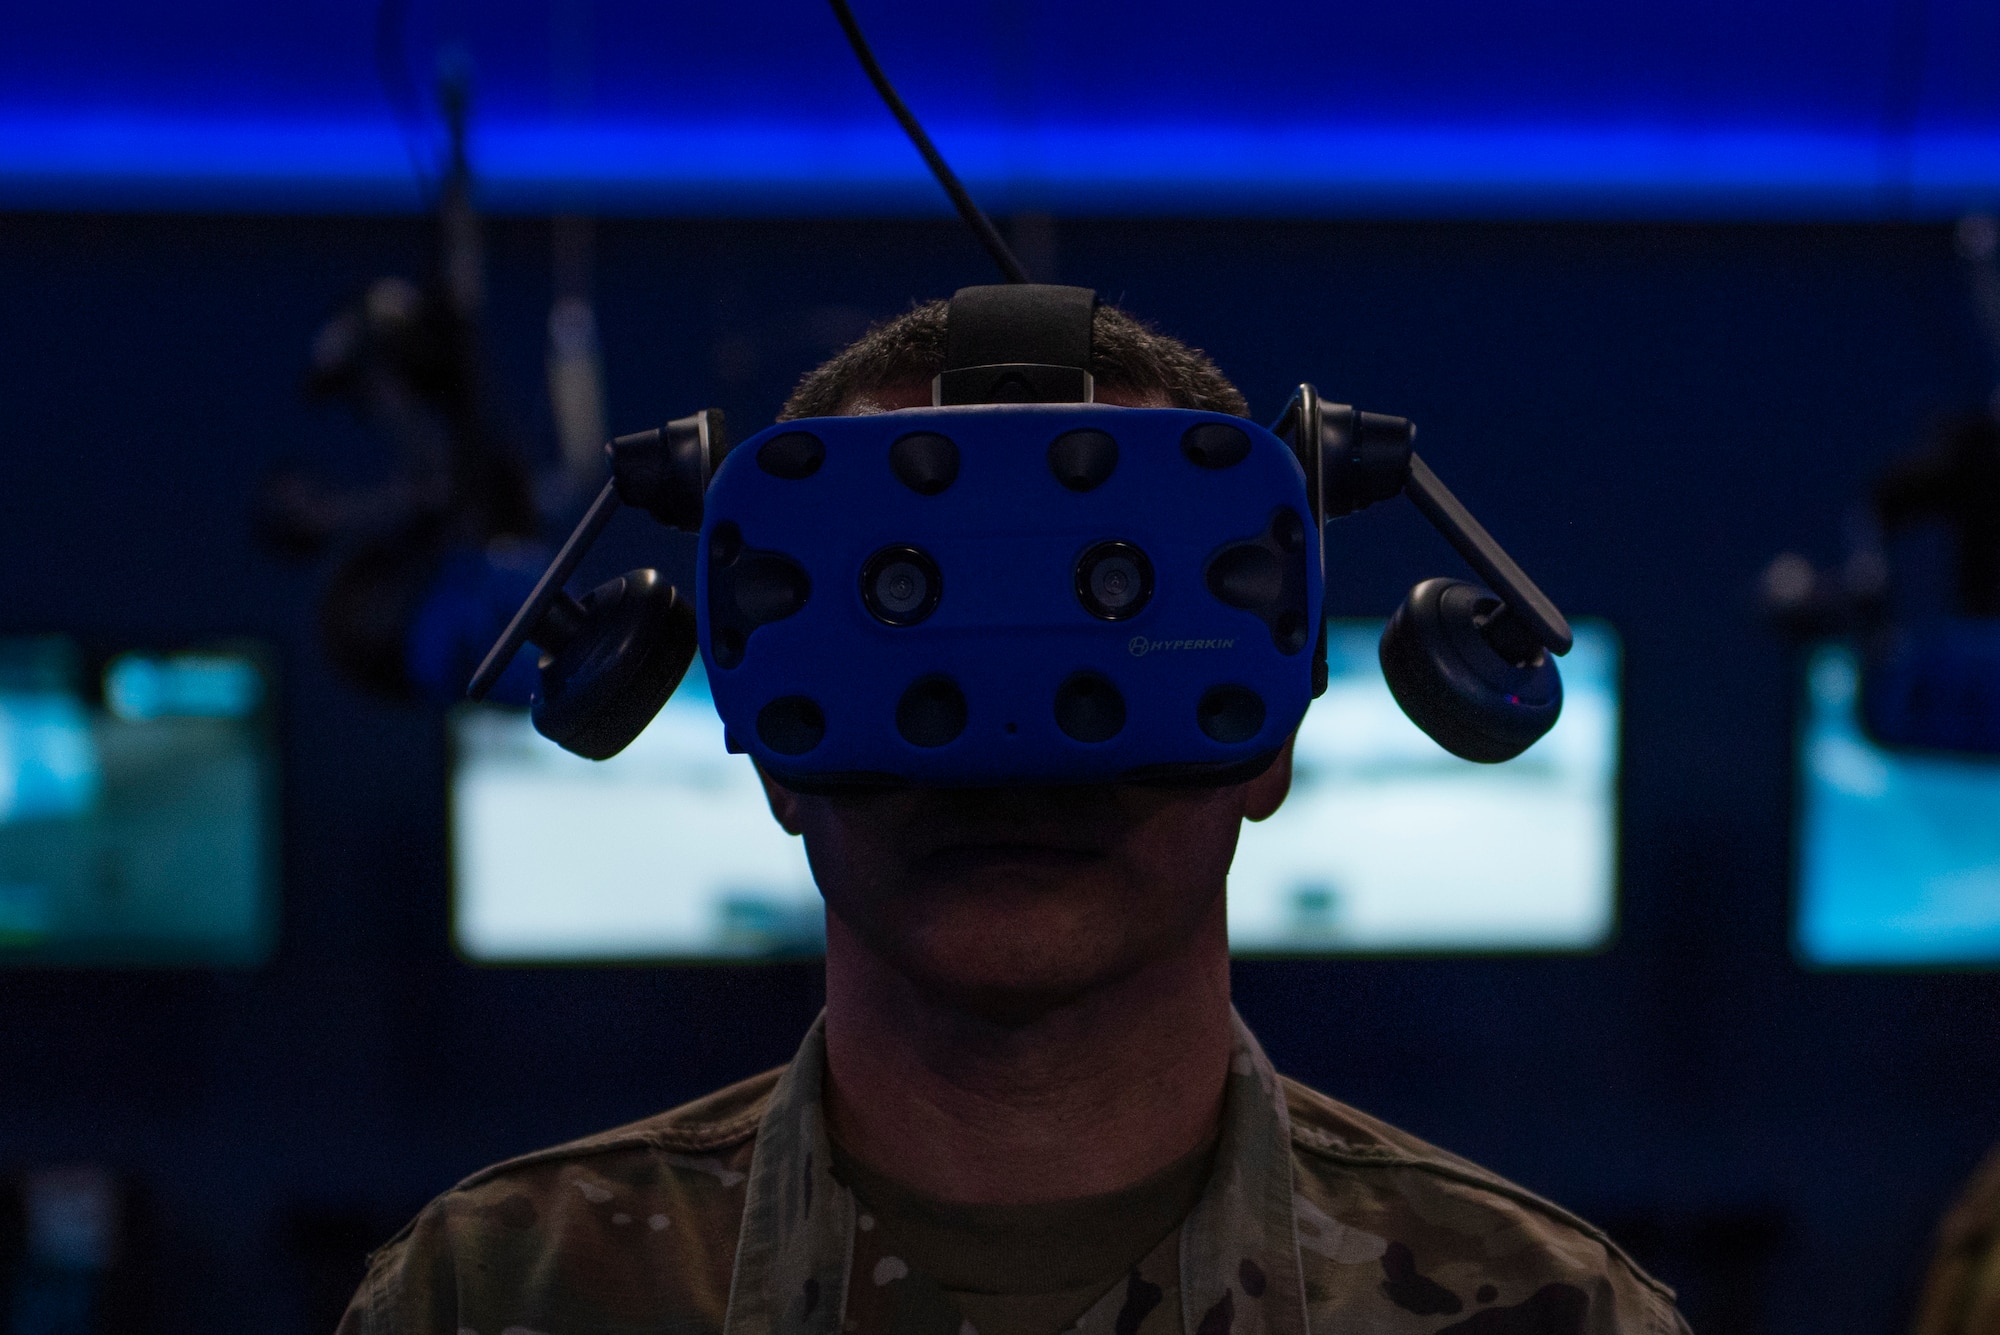 U.S. Air Force Chief Master Sgt. Brian Kruzelnick, Air Mobility Command command chief, uses virtual reality goggles during a 317th Maintenance Group capabilities briefing at Dyess Air Force Base, Texas, July 8, 2021. Airmen from the 317th MXG demonstrated the groups VR training capabilities and briefed the data gathered to the AMC command team. (U.S. Air Force photo by Senior Airman Colin Hollowell)